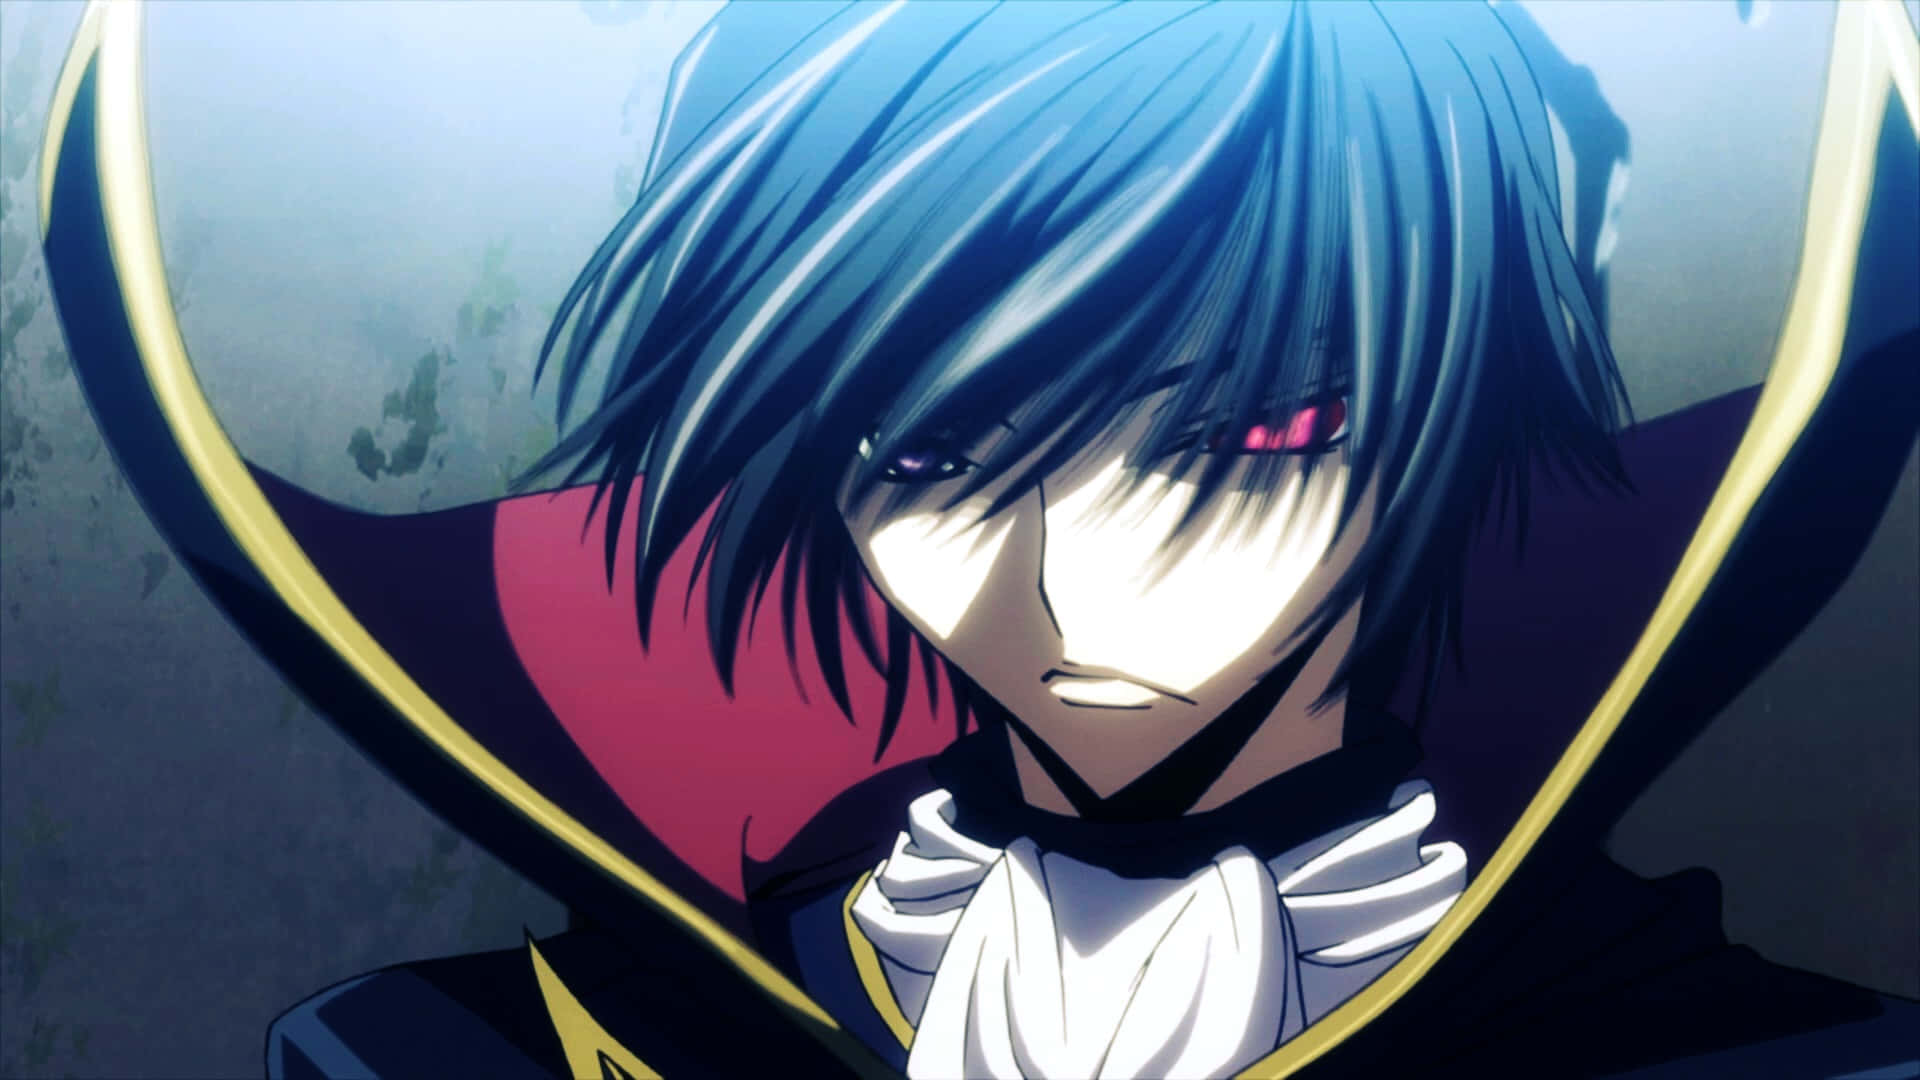 The brilliance of Lelouch and his Black Knights